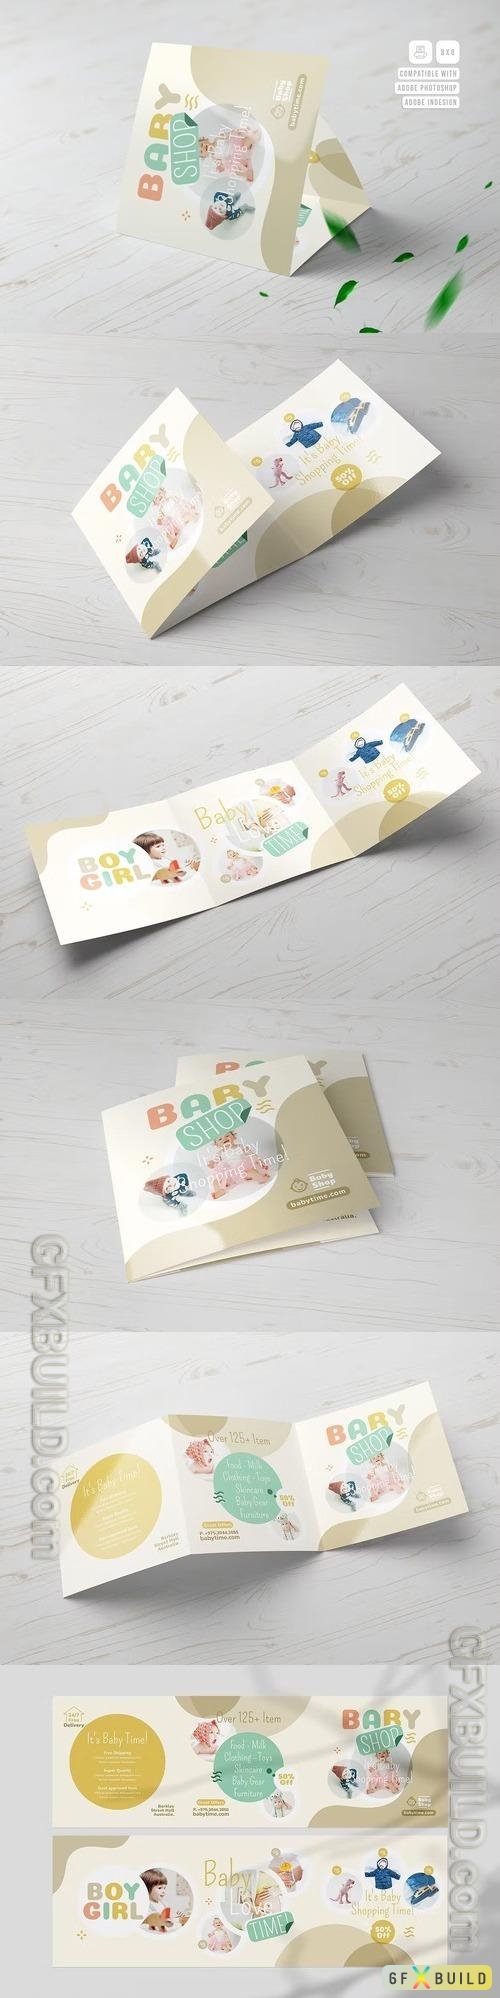 Baby Shop Square Trifold Brochure